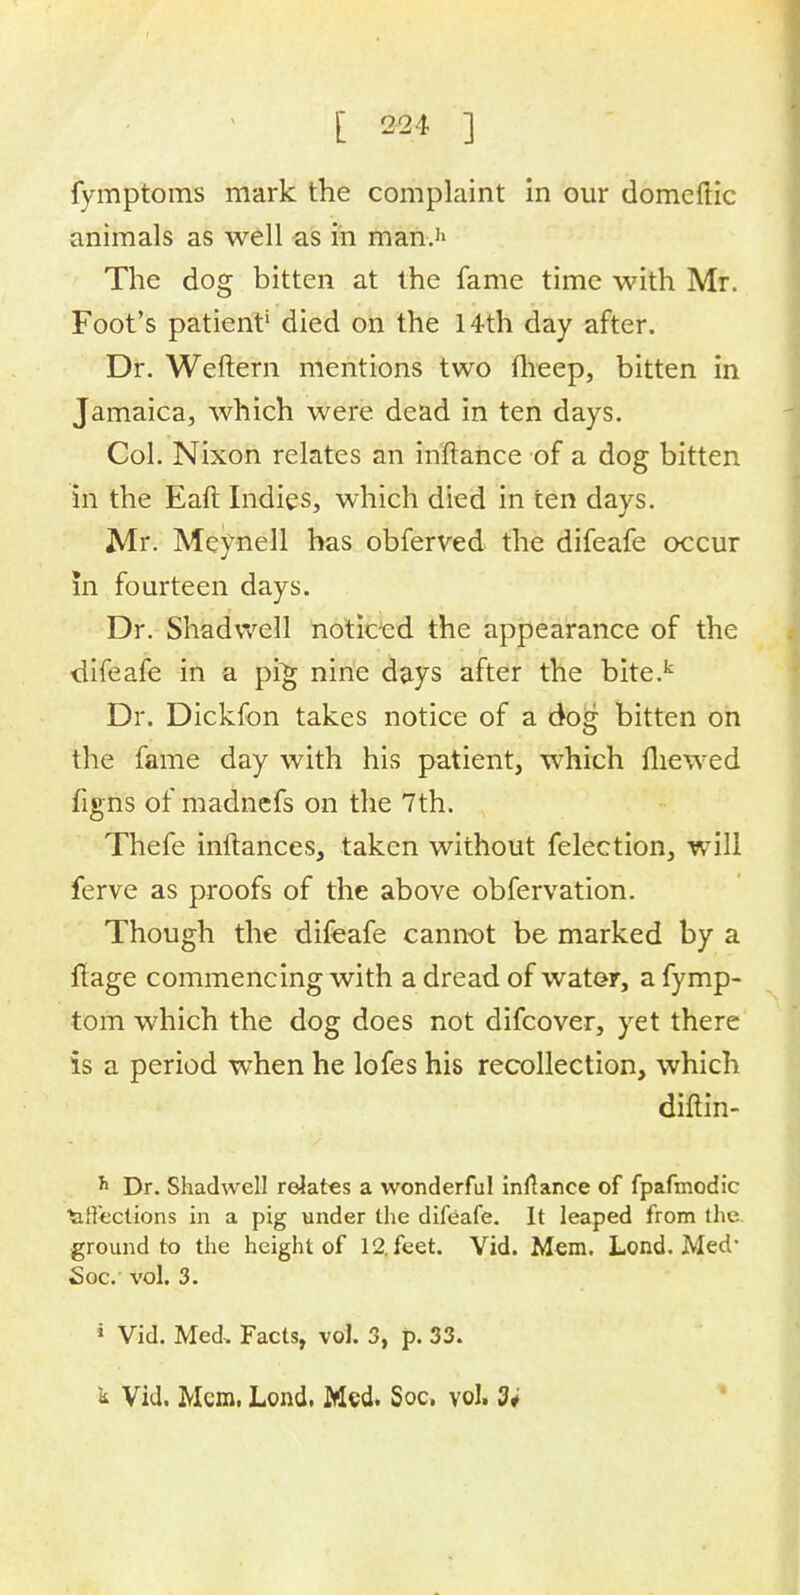 fymptoms mark the complaint in our domcftic animals as well as in man.'1 The dog bitten at the fame time with Mr. Foot's patient' died on the 14th day after. Dr. Weftern mentions two fheep, bitten in Jamaica, which were dead in ten days. Col. Nixon relates an in'ftahce of a dog bitten in the Earl Indies, which died in ten days. Mr. Meynell has obferved the difeafe occur In fourteen days. Dr. Shadwell noticed the appearance of the difeafe in a pig nine days after the bite.k Dr. Dickfon takes notice of a dog bitten on the fame day with his patient, which mewed figns of madnefs on the 7th. Thefe inftances, taken without felection, will ferve as proofs of the above obfervation. Though the difeafe cannot be marked by a ftage commencing with a dread of water, a fymp- tom which the dog does not difcover, yet there is a period when he lofes his recollection, which diffih- h Dr. Shadwell relates a wonderful inftanee of fpafmodic tiffections in a pig under the difeafe. It leaped from the ground to the height of 12. feet. Vid. Mem. Lond. Med Soc. vol. 3. • Vid. Med. Facts, vol. 3, p. 33. k Vid. Mem. Lond. Med. Soc. vol. 3;